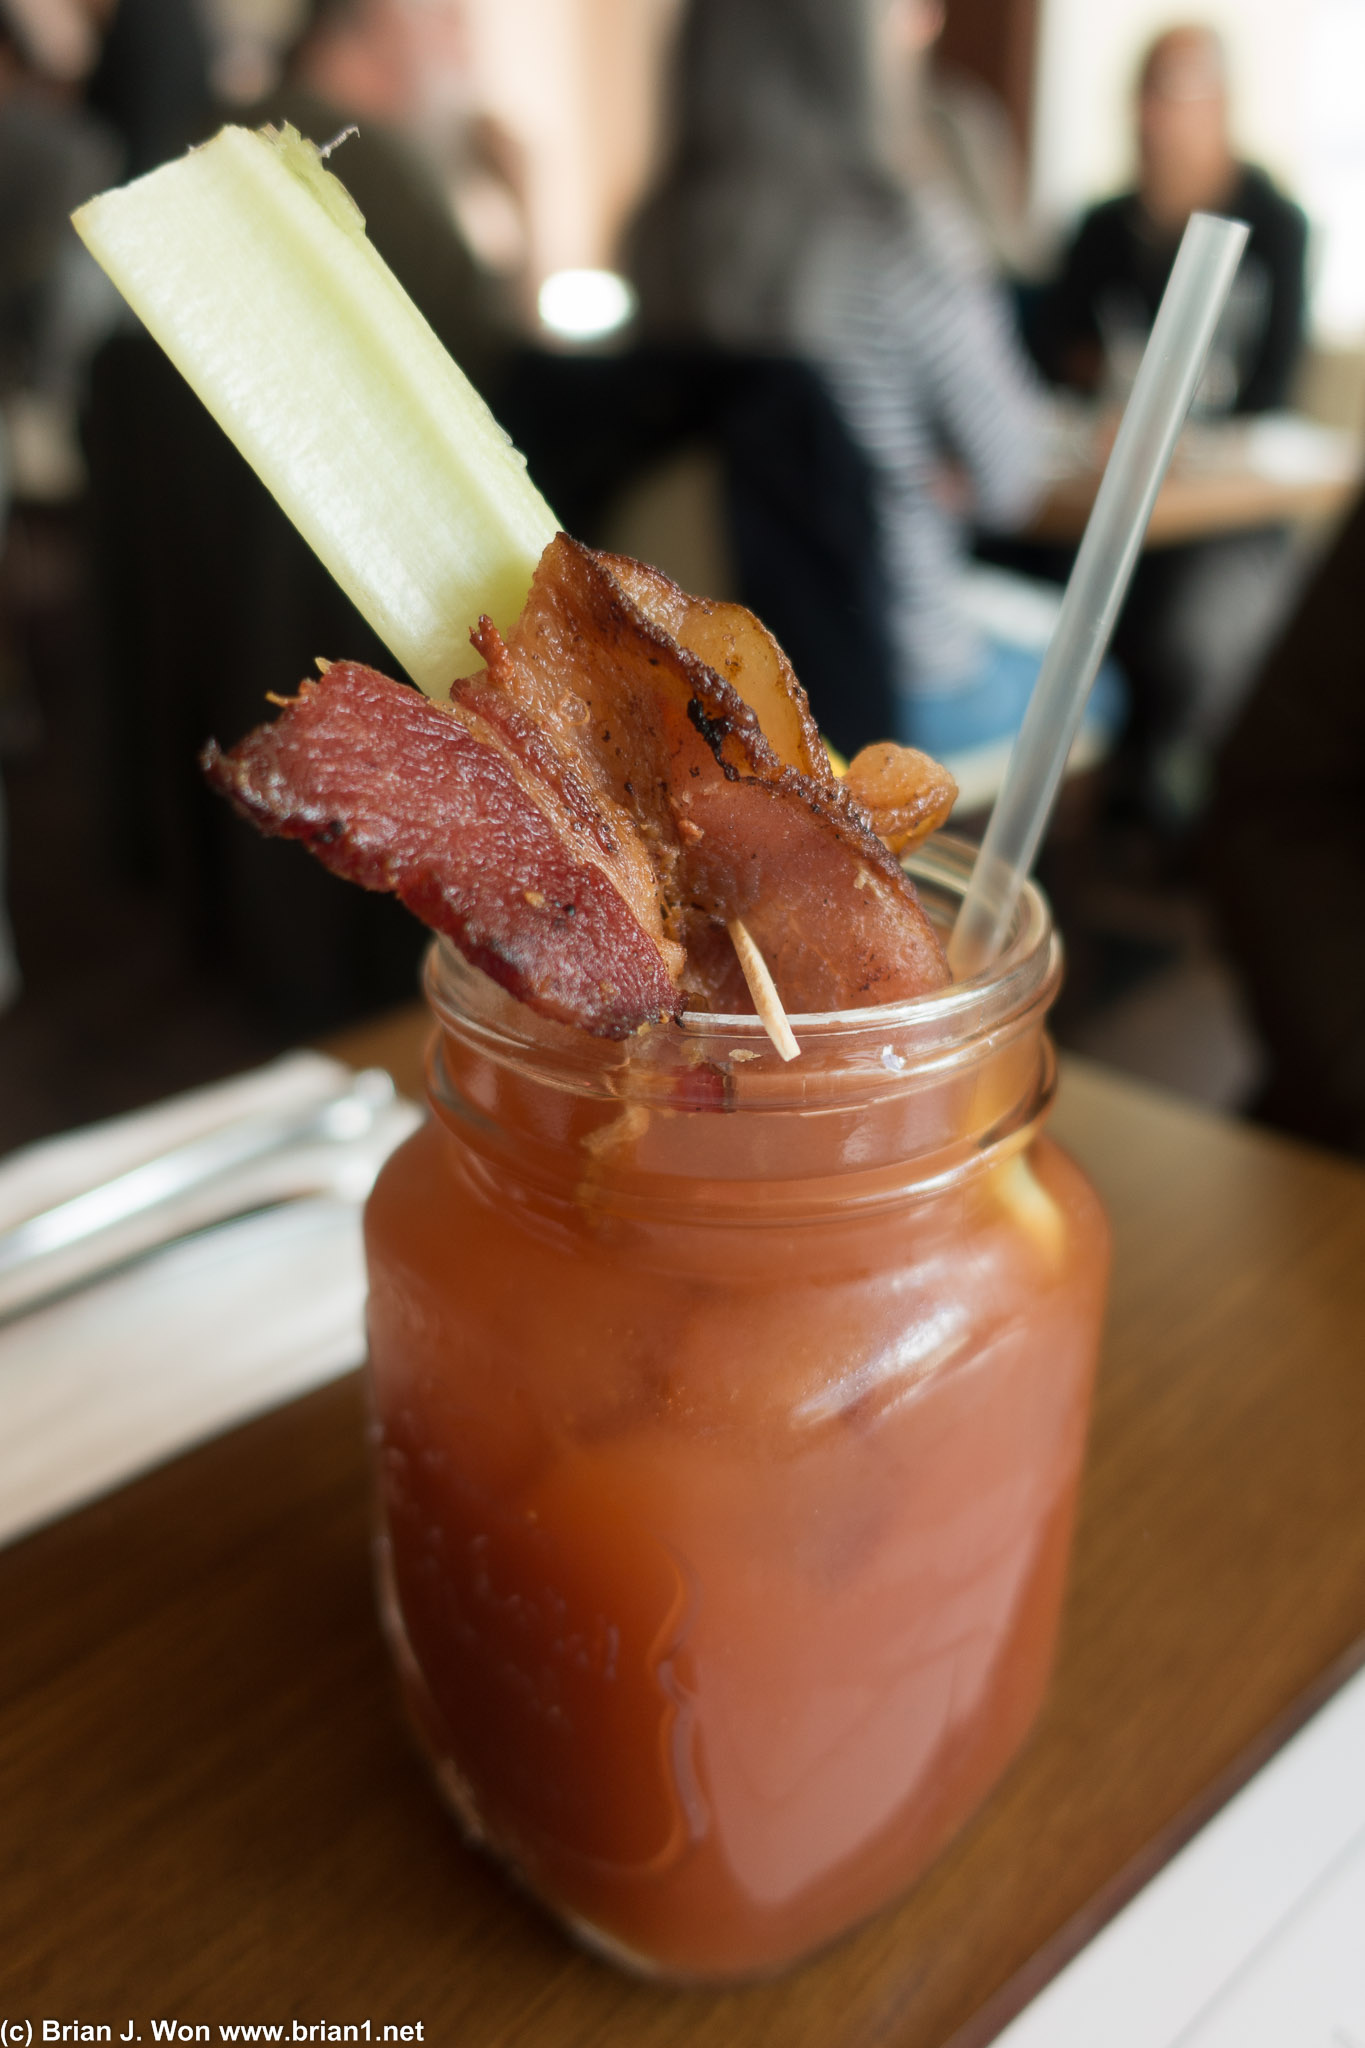 Bacon bloody mary. Disappointing-- more ordinary than expected.